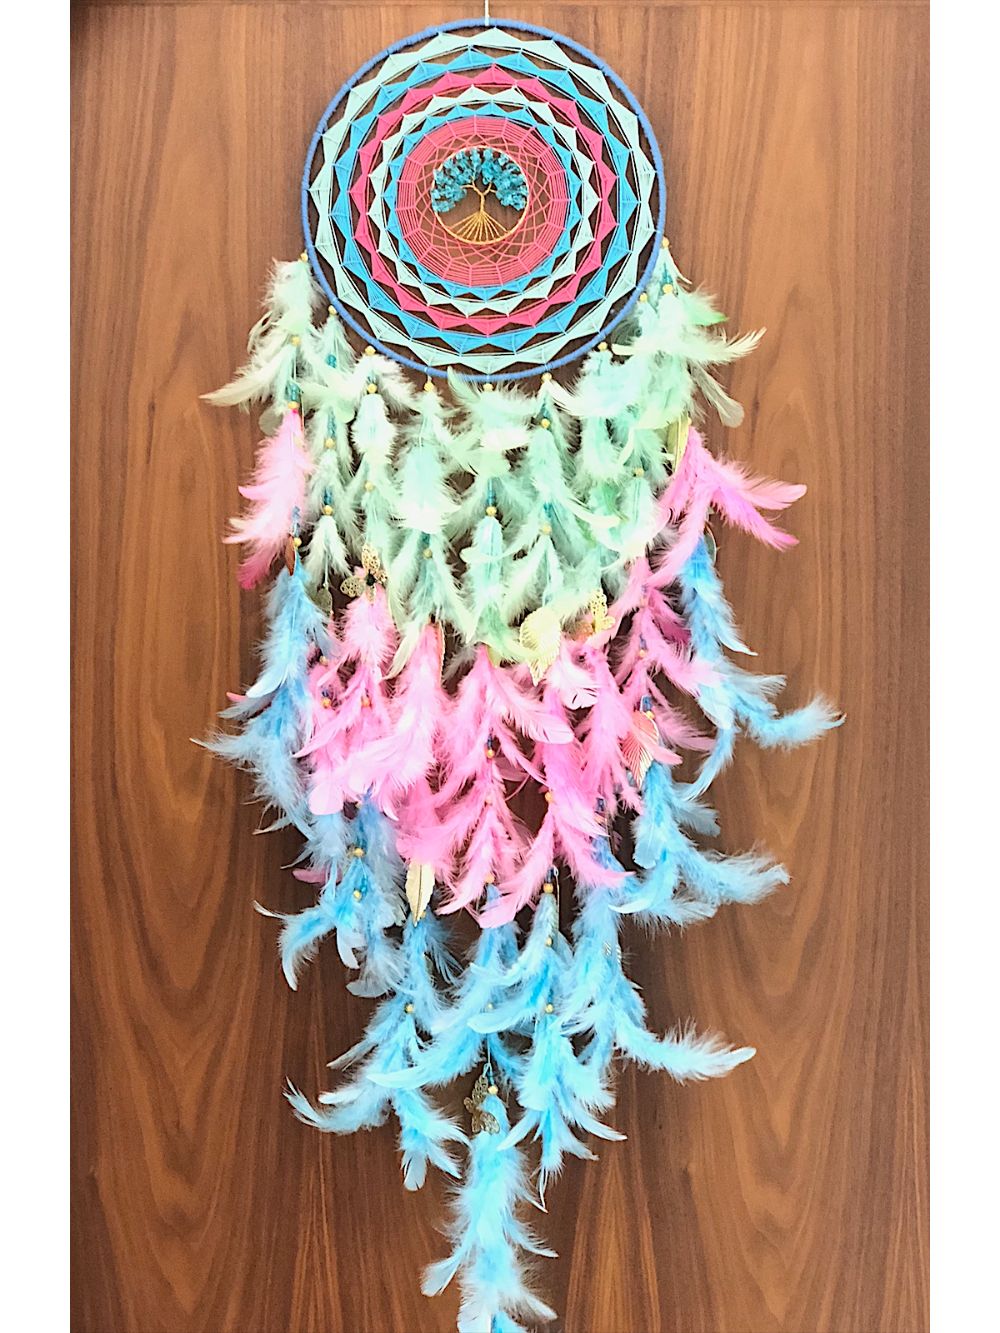 Large Pastel Healing TreeDream Catcher with Pretty Lights